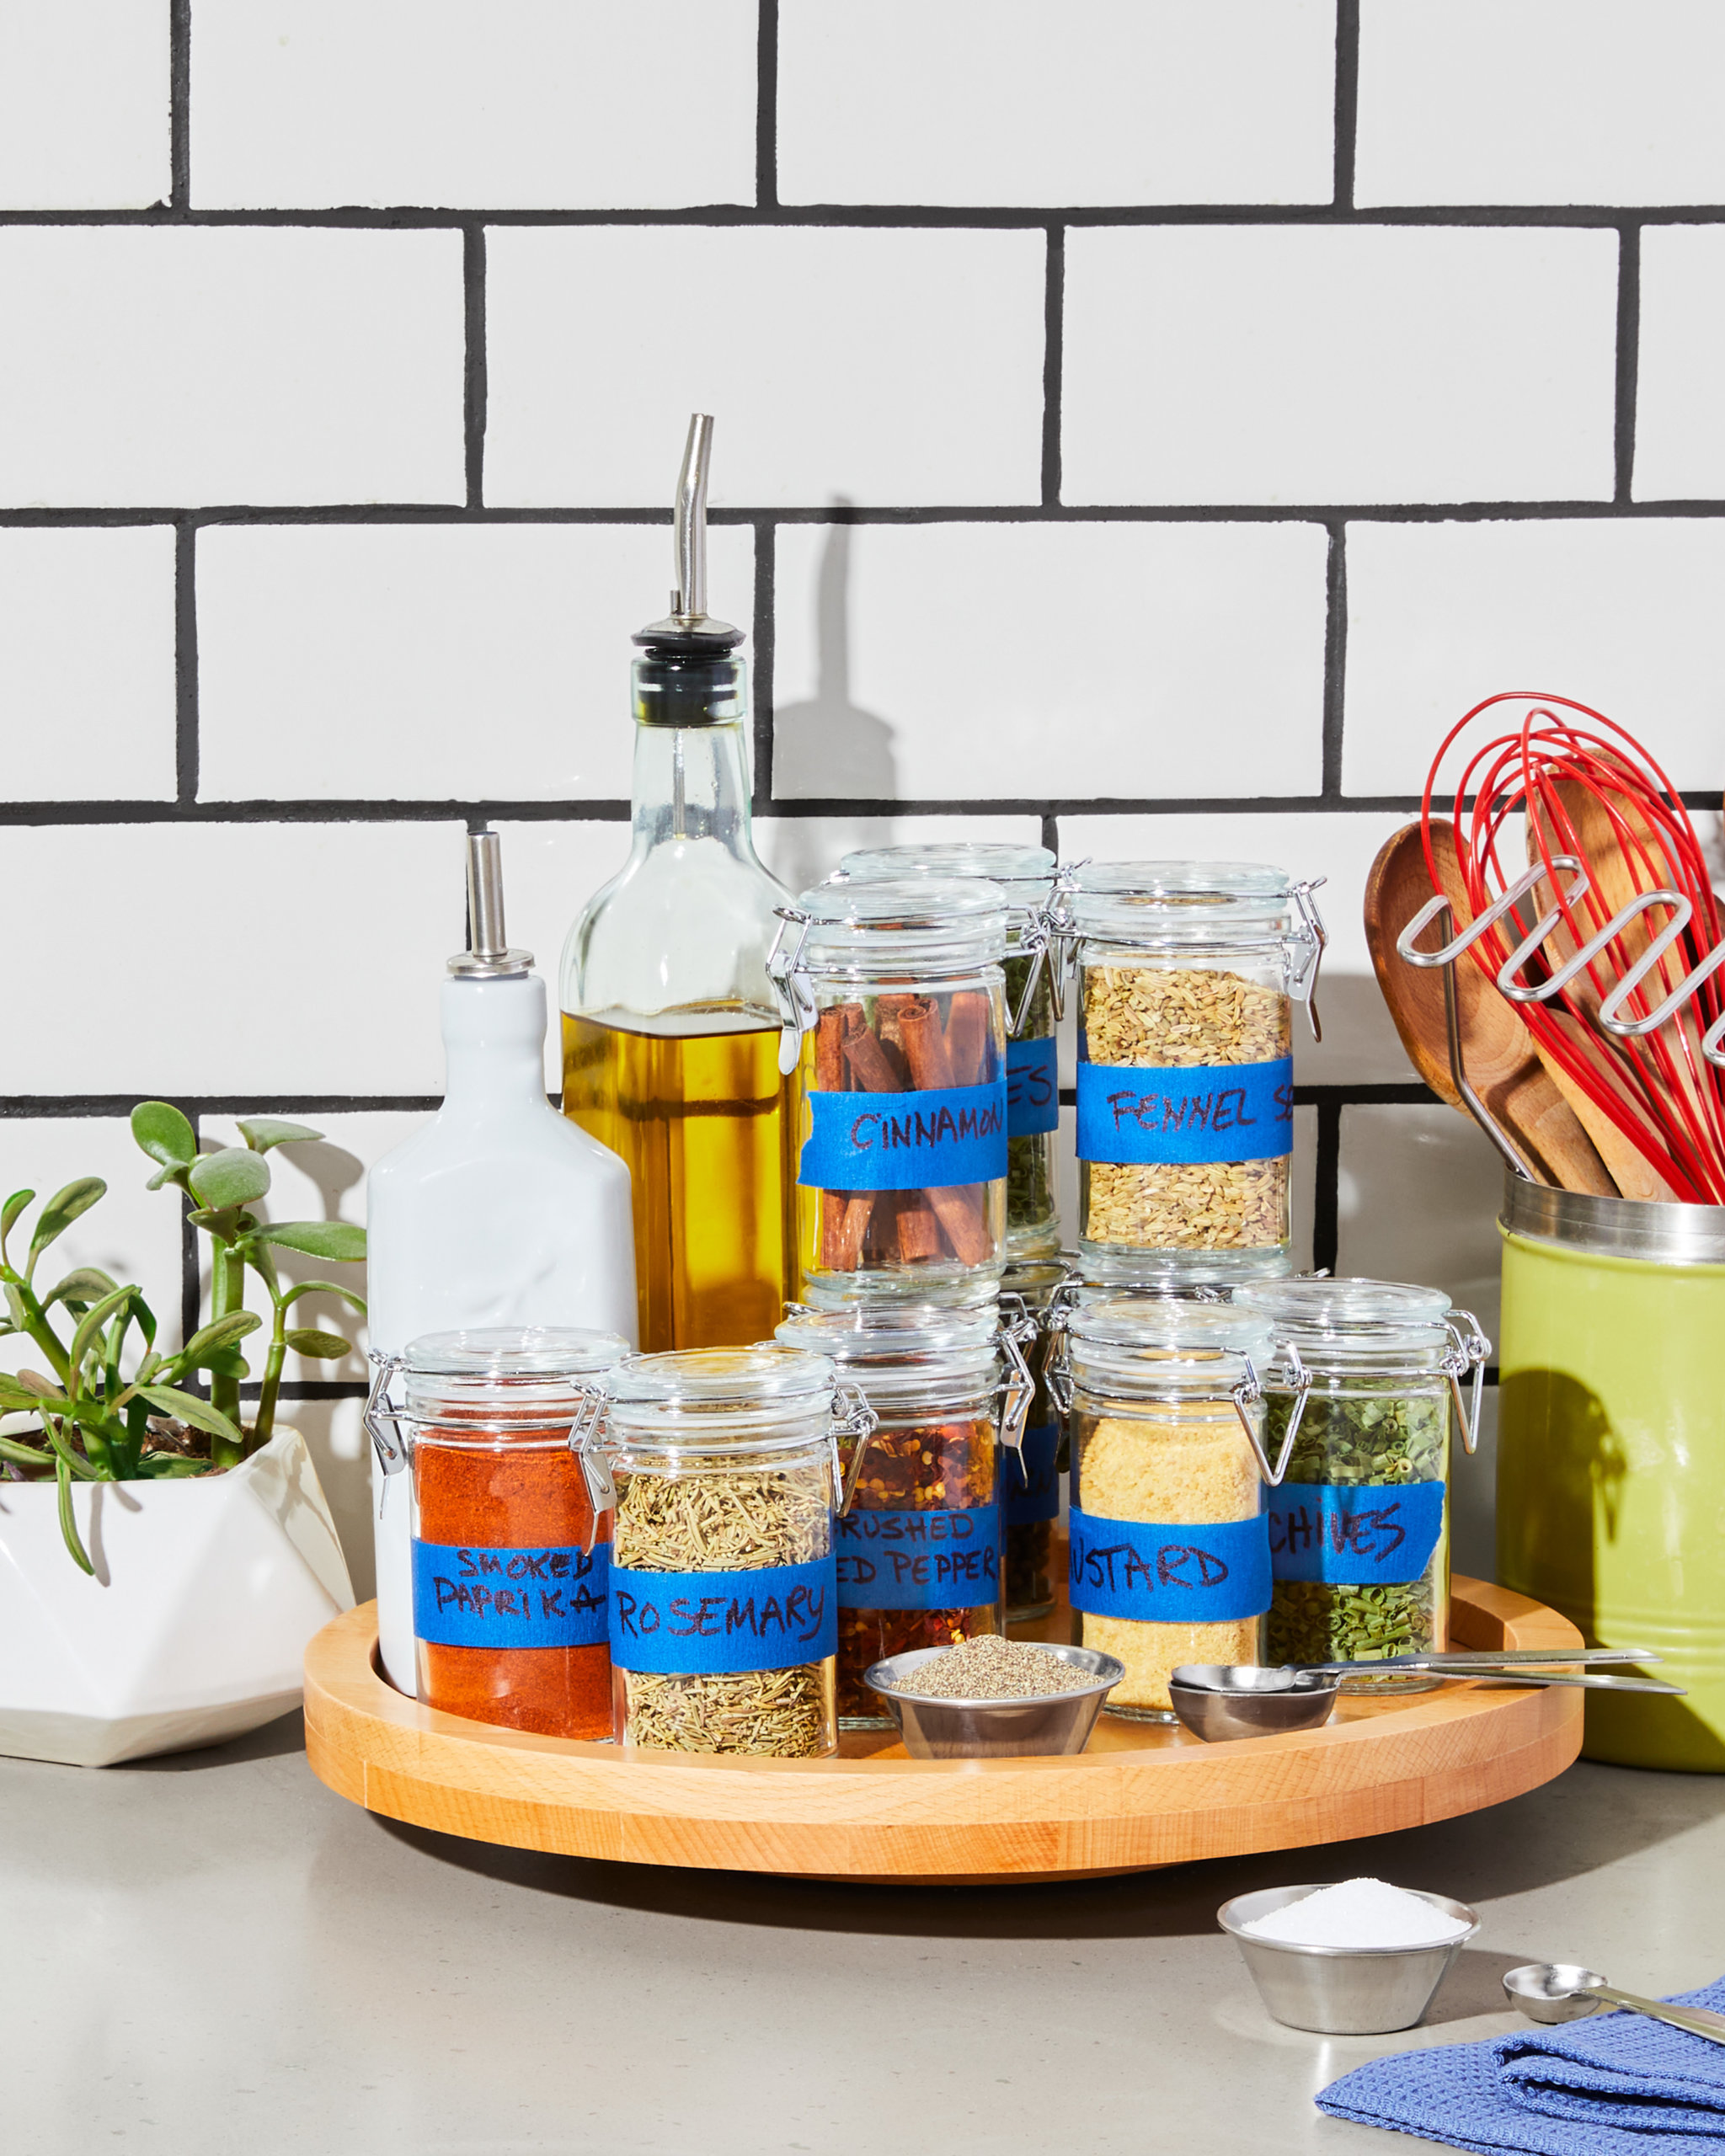 Organize Your Spice Cabinet with labels and a spice caddy